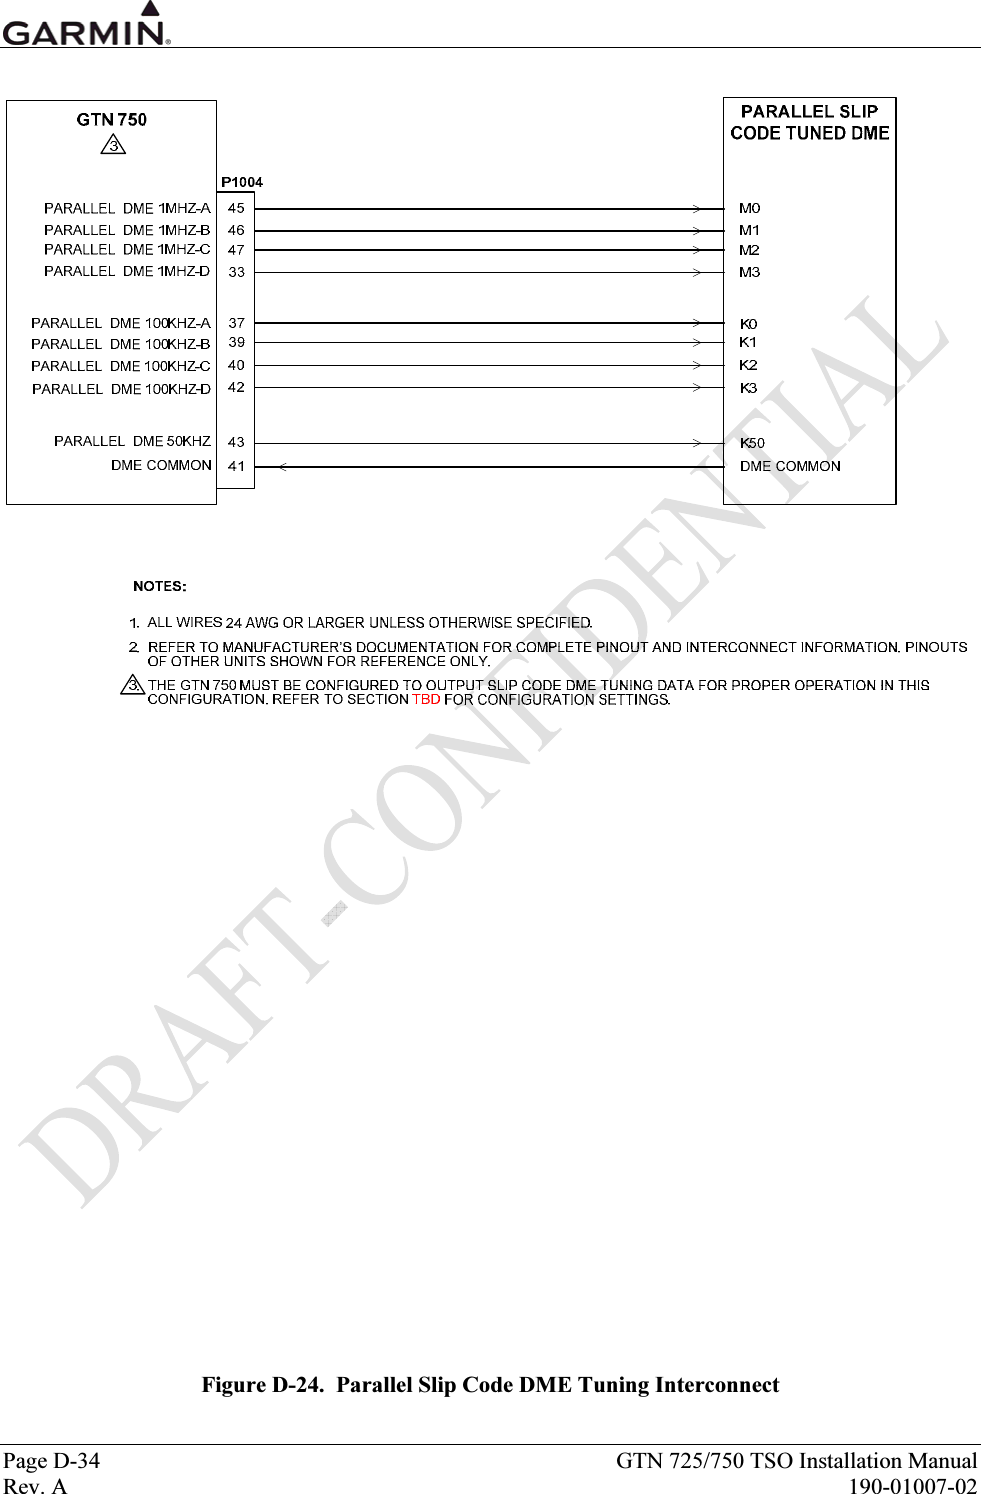  Page D-34  GTN 725/750 TSO Installation Manual Rev. A  190-01007-02  Figure D-24.  Parallel Slip Code DME Tuning Interconnect 